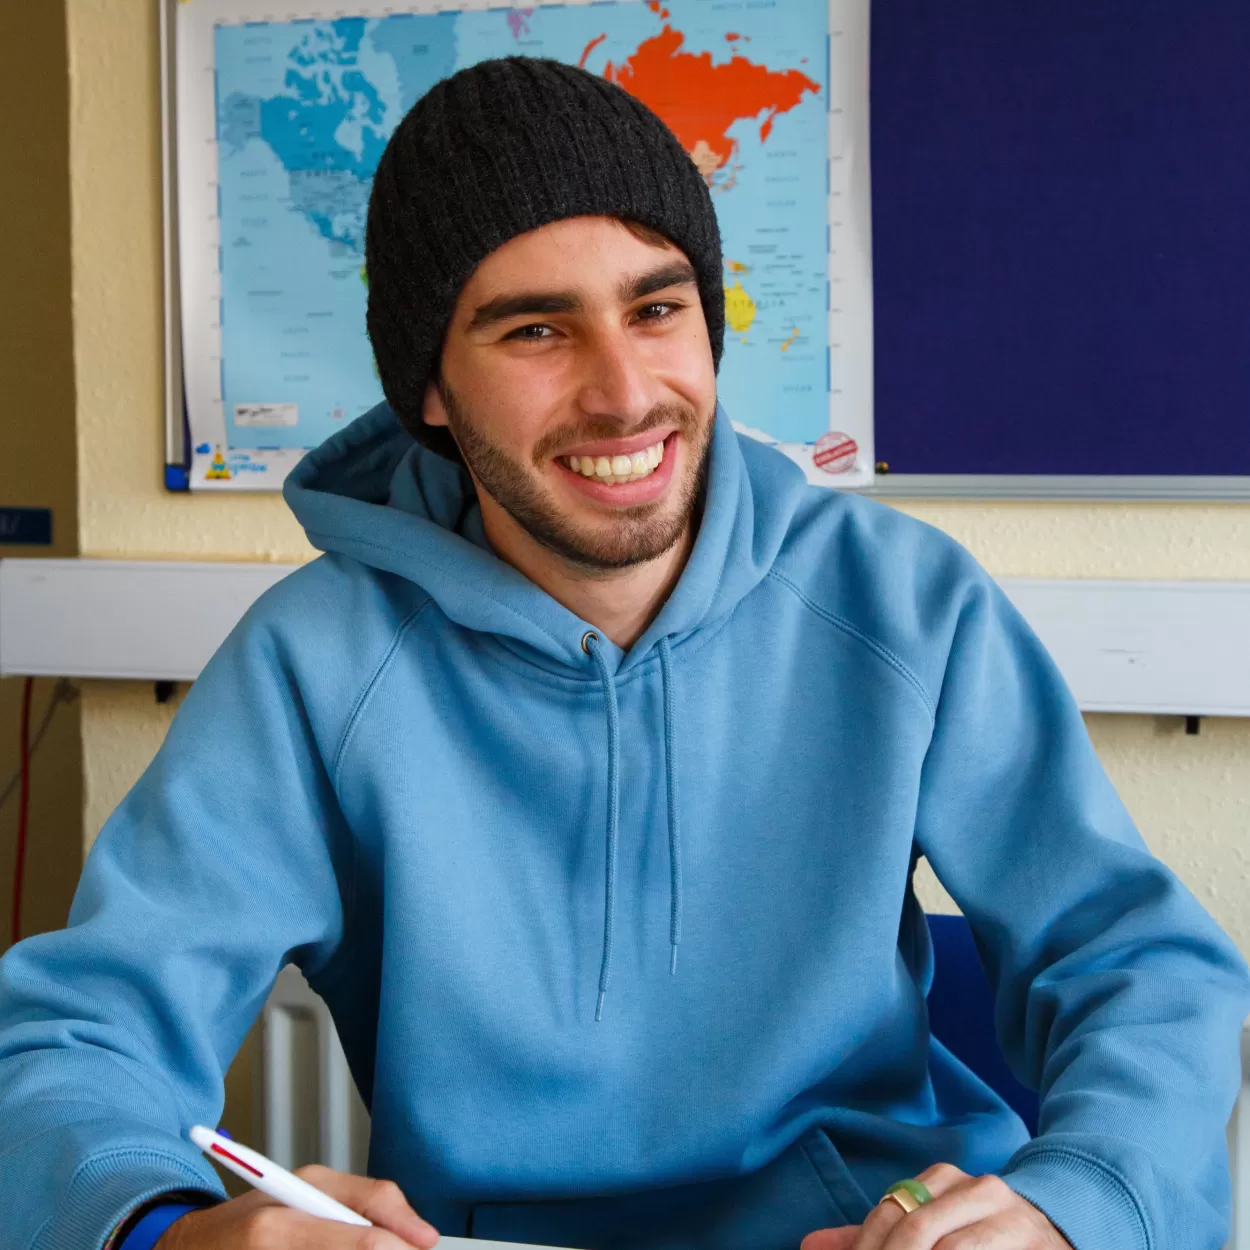 A photo of Mathieu Galliano from France studying at ELC Chester in January 2023. He's wearing a pale blue hoodie and a black beanie hat, and he's smiling at the camera.